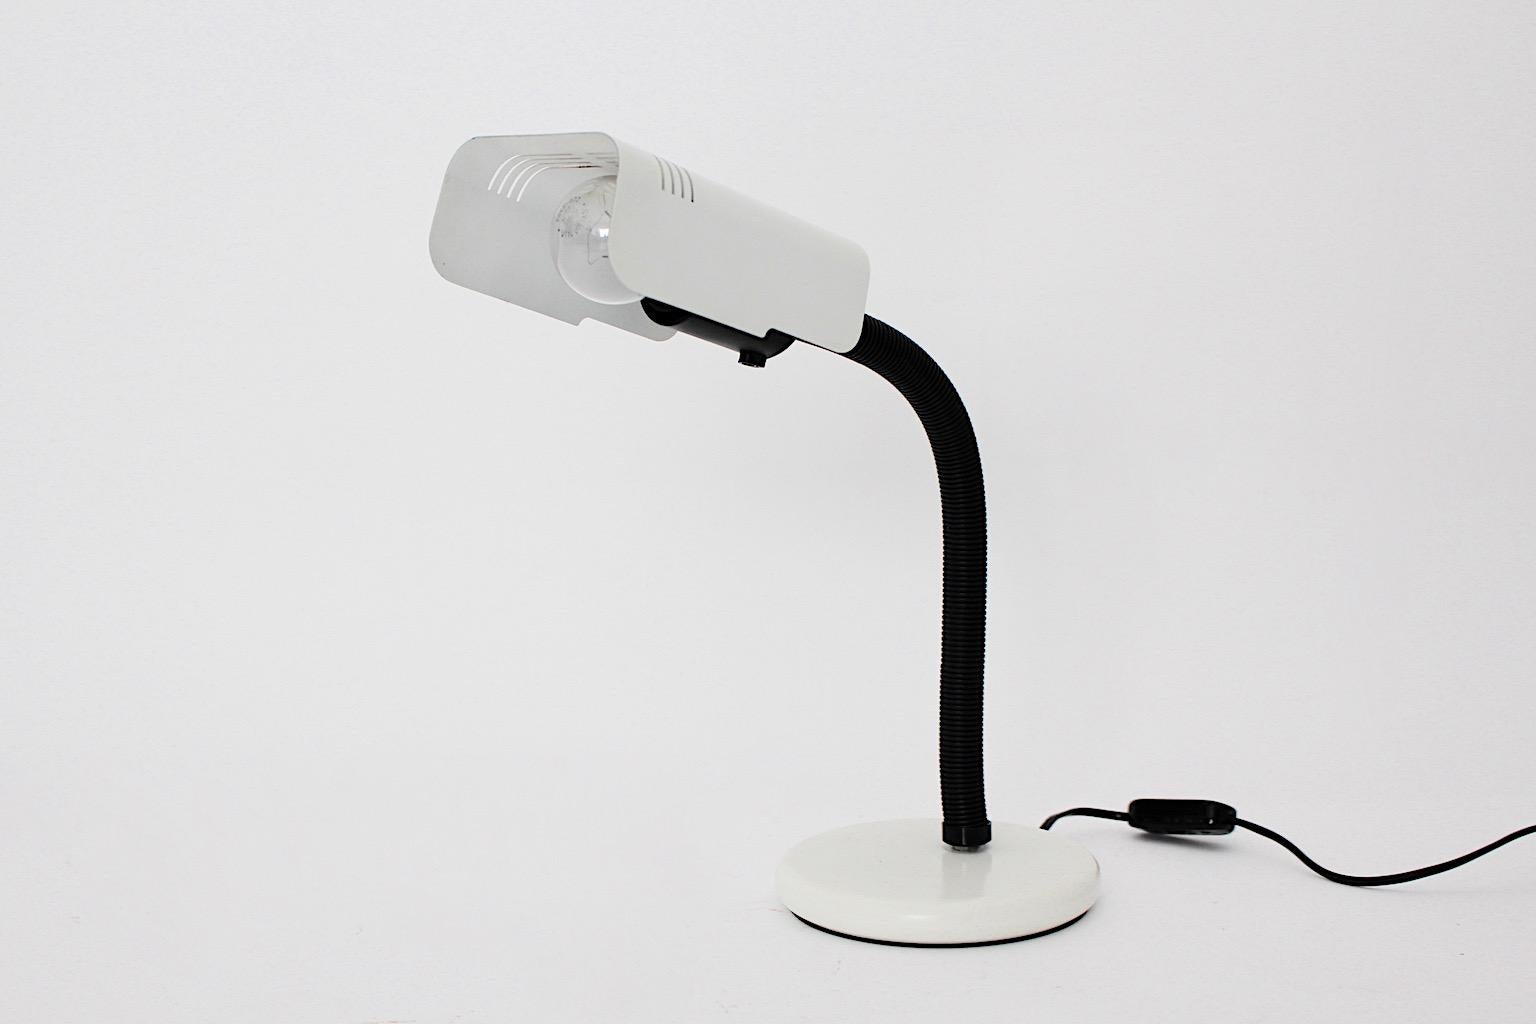 Space Age vintage table lamp desk lamp by Targetti 1970s Italy.
The desk lamp shows black flexible tube arm and white lacquered metal base and shade.
On / off switch. One E 27 socket
Company name is labeled underneath
Very good condition with